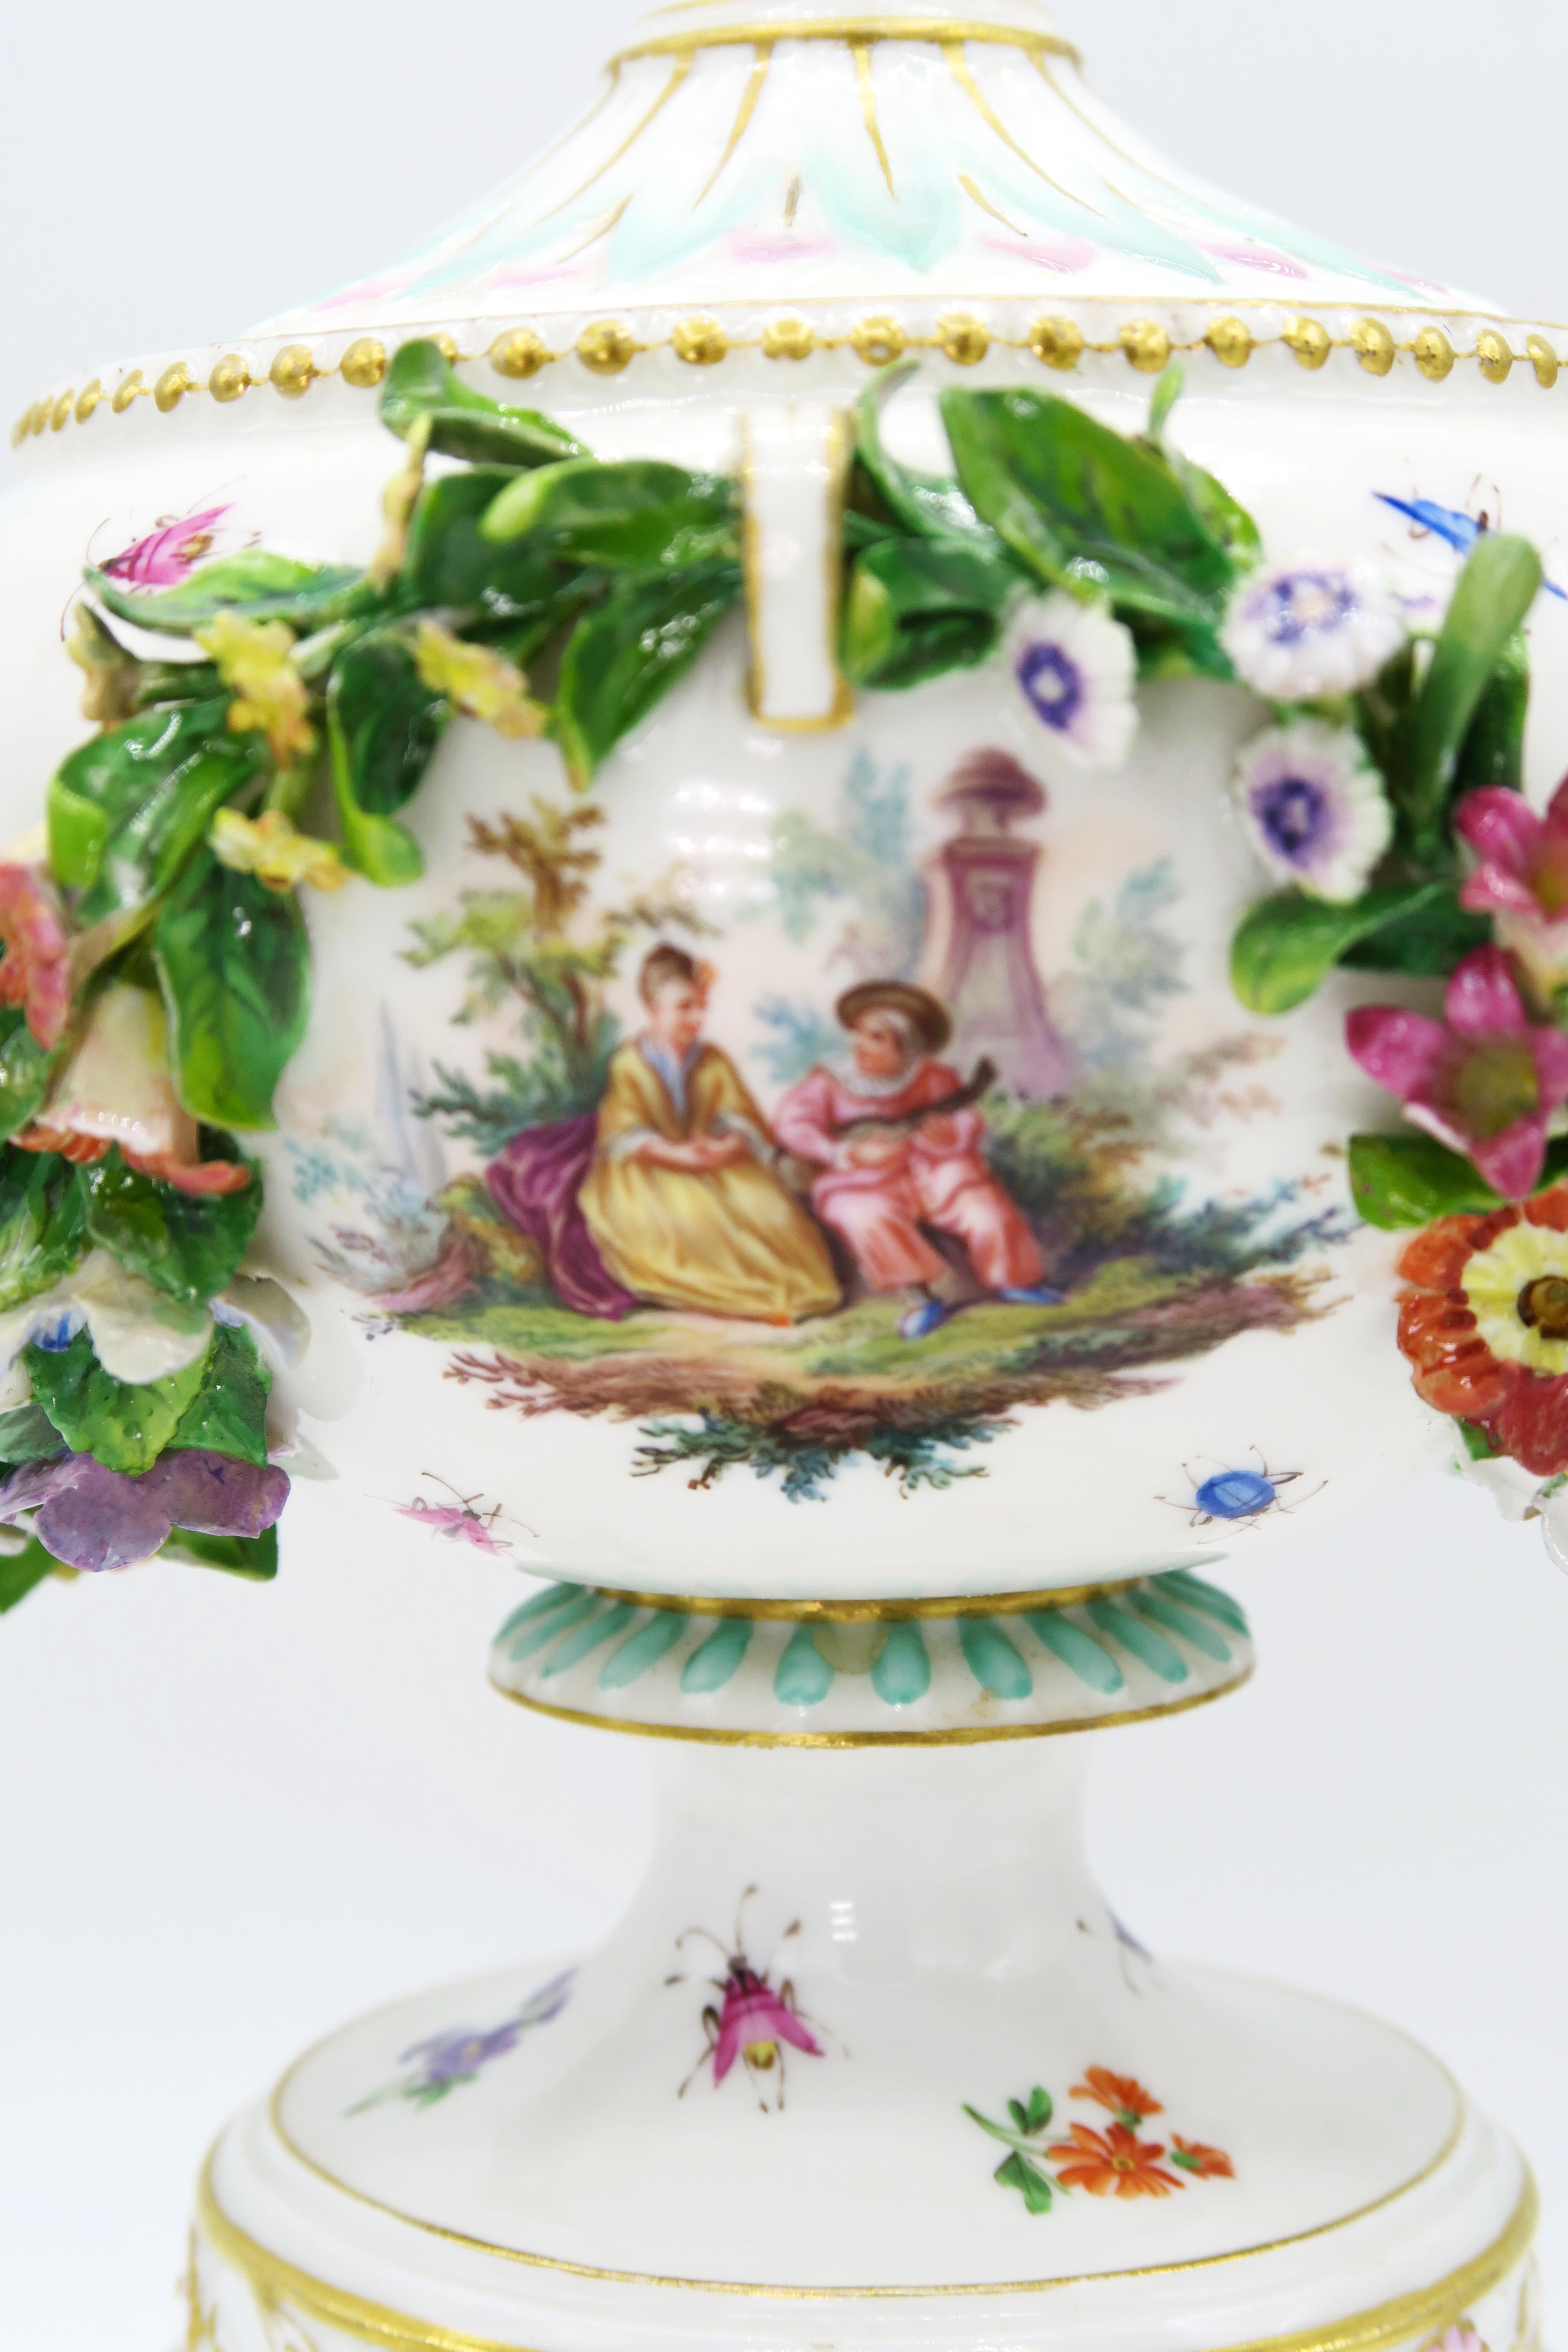 19th century European hand painted white Meissen porcelain vase on pedestal

Round foot, short shaft, hemispherical body, attached ear handles. Removable lid with large knob.
Wall on both sides on embossed flower garland in between 